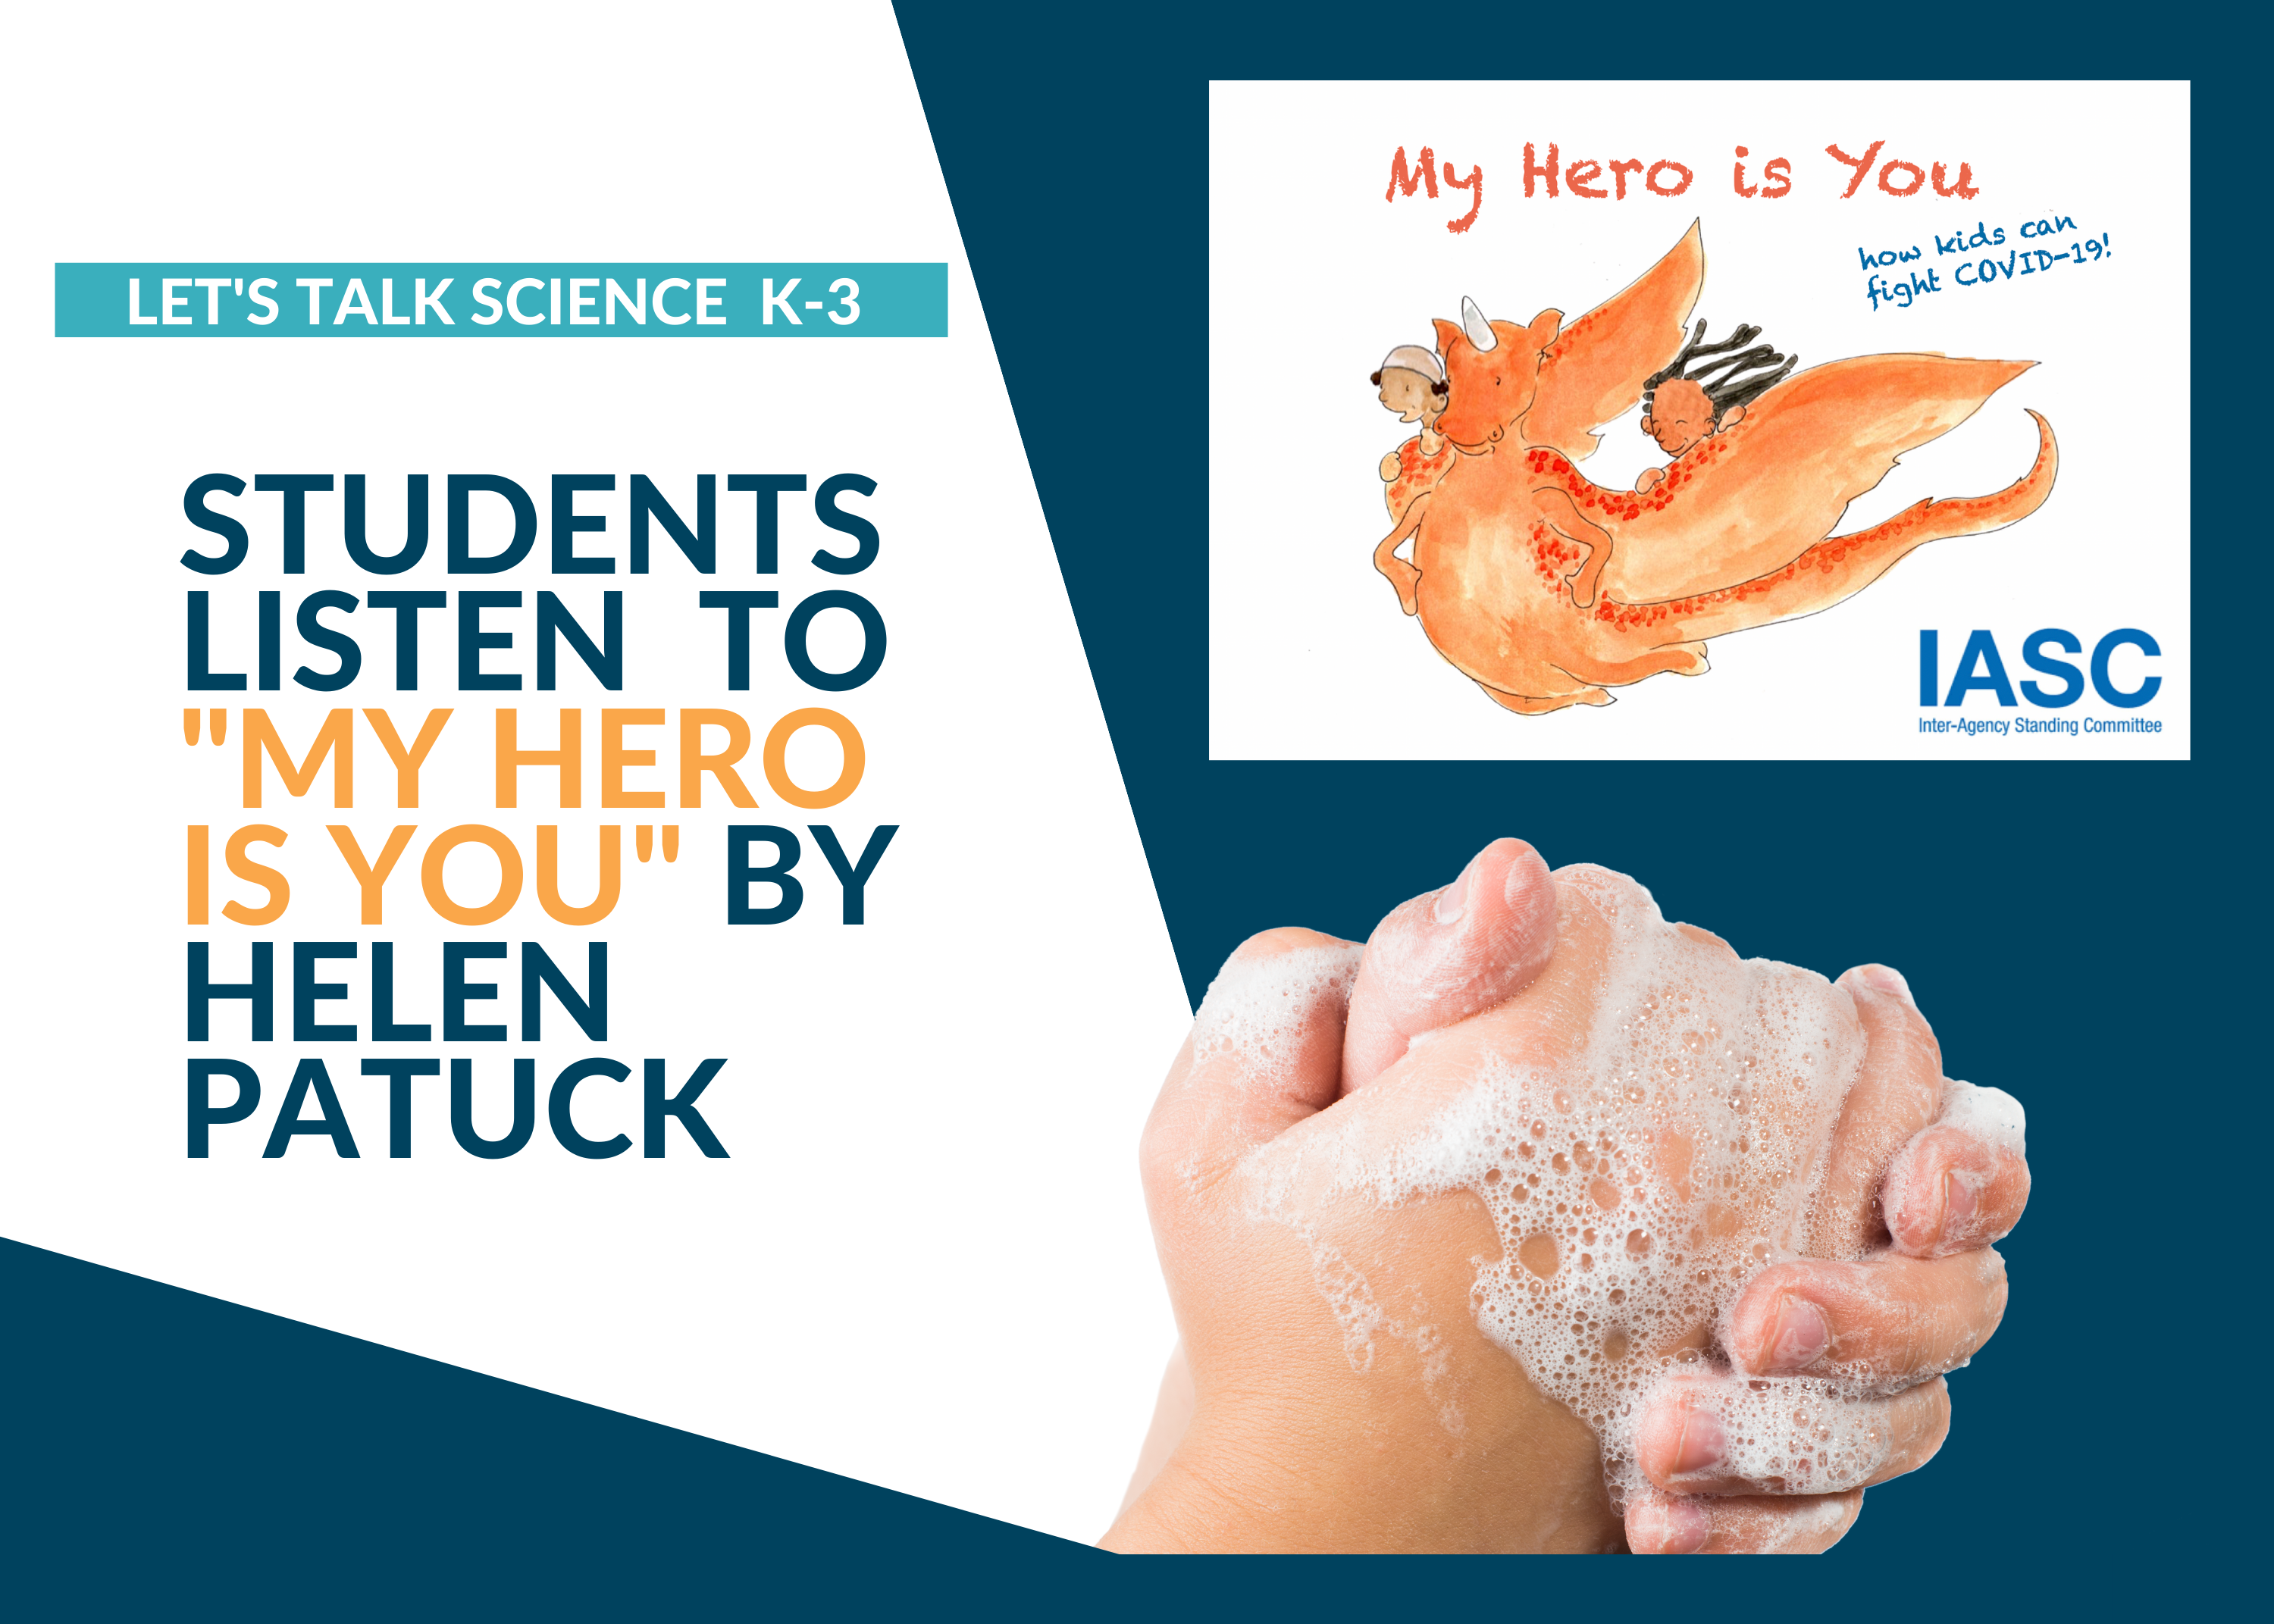 Grades K-3 Students Learn About the Importance of Hand Washing with Let’s Talk Science!